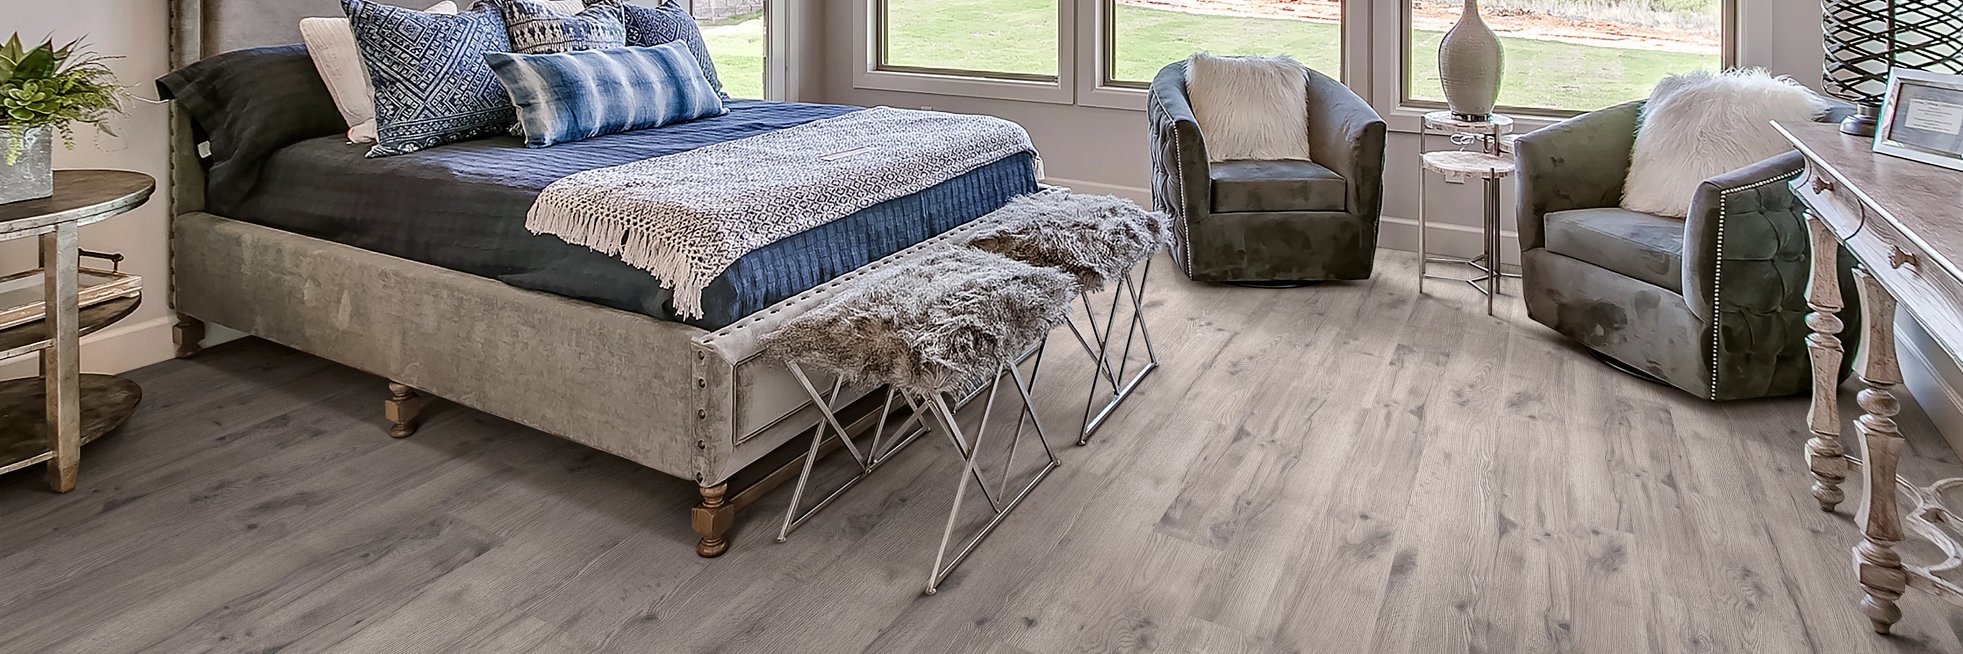 Bedroom with wood-look laminate flooring from Pat Smith’s Flooring in the Louisville, KY area